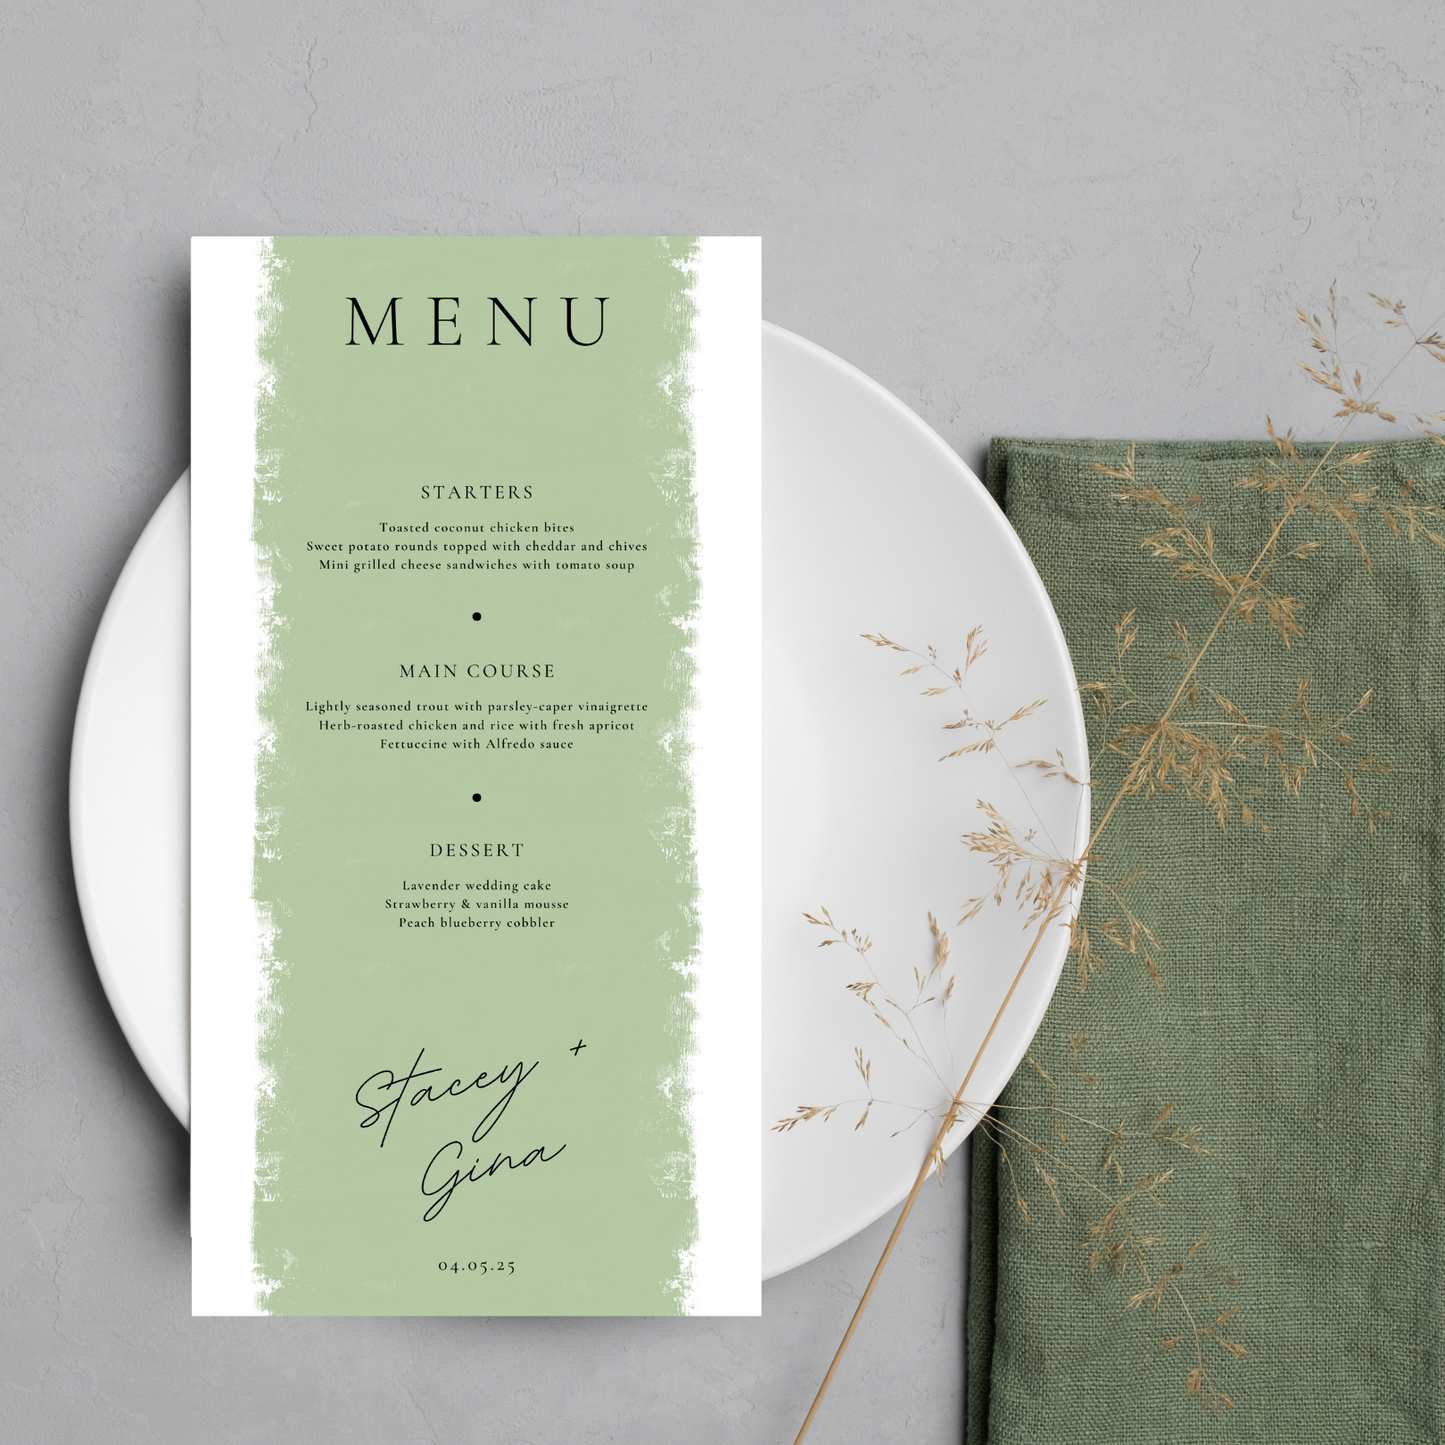 A white and sage coloured wedding menu lays on a round white plate against a light grey background. A small, dried branch of leaves teeters on bottom right the corner of the plate and a folded, olive green napkin is tucked underneath the right hand side of the plate.